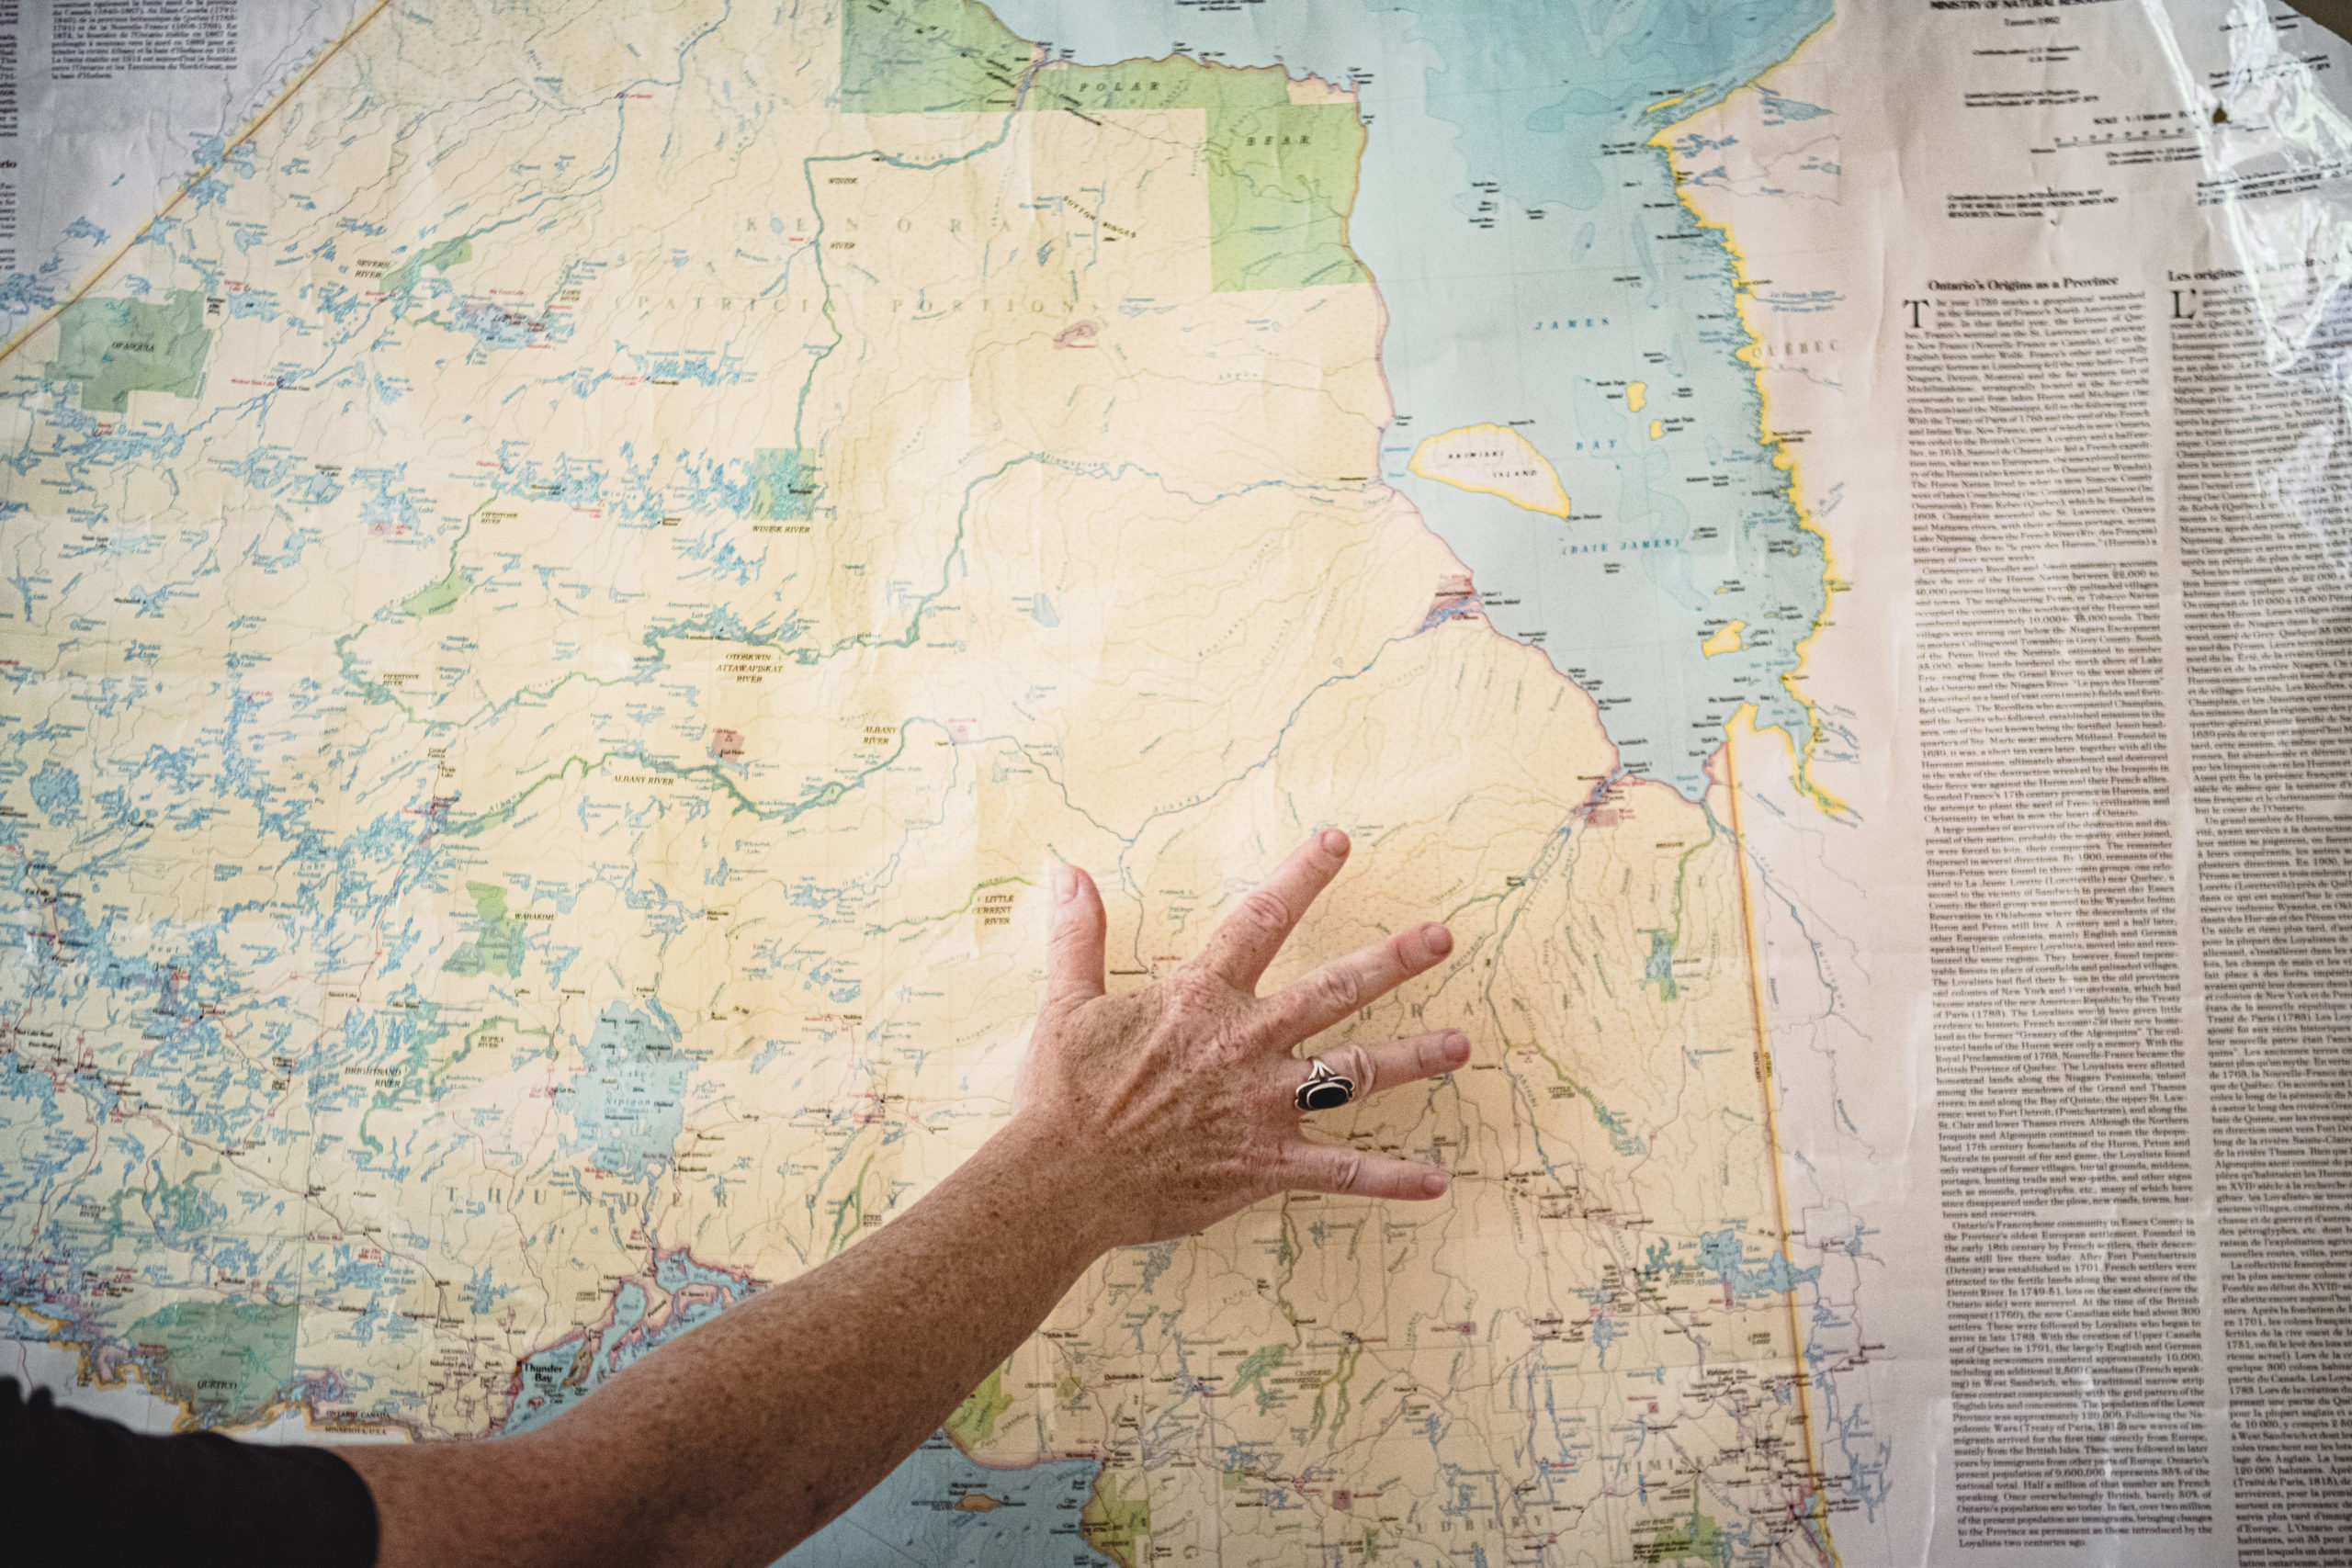 A hand hovering over a map of the Ring of Fire area in Ontario